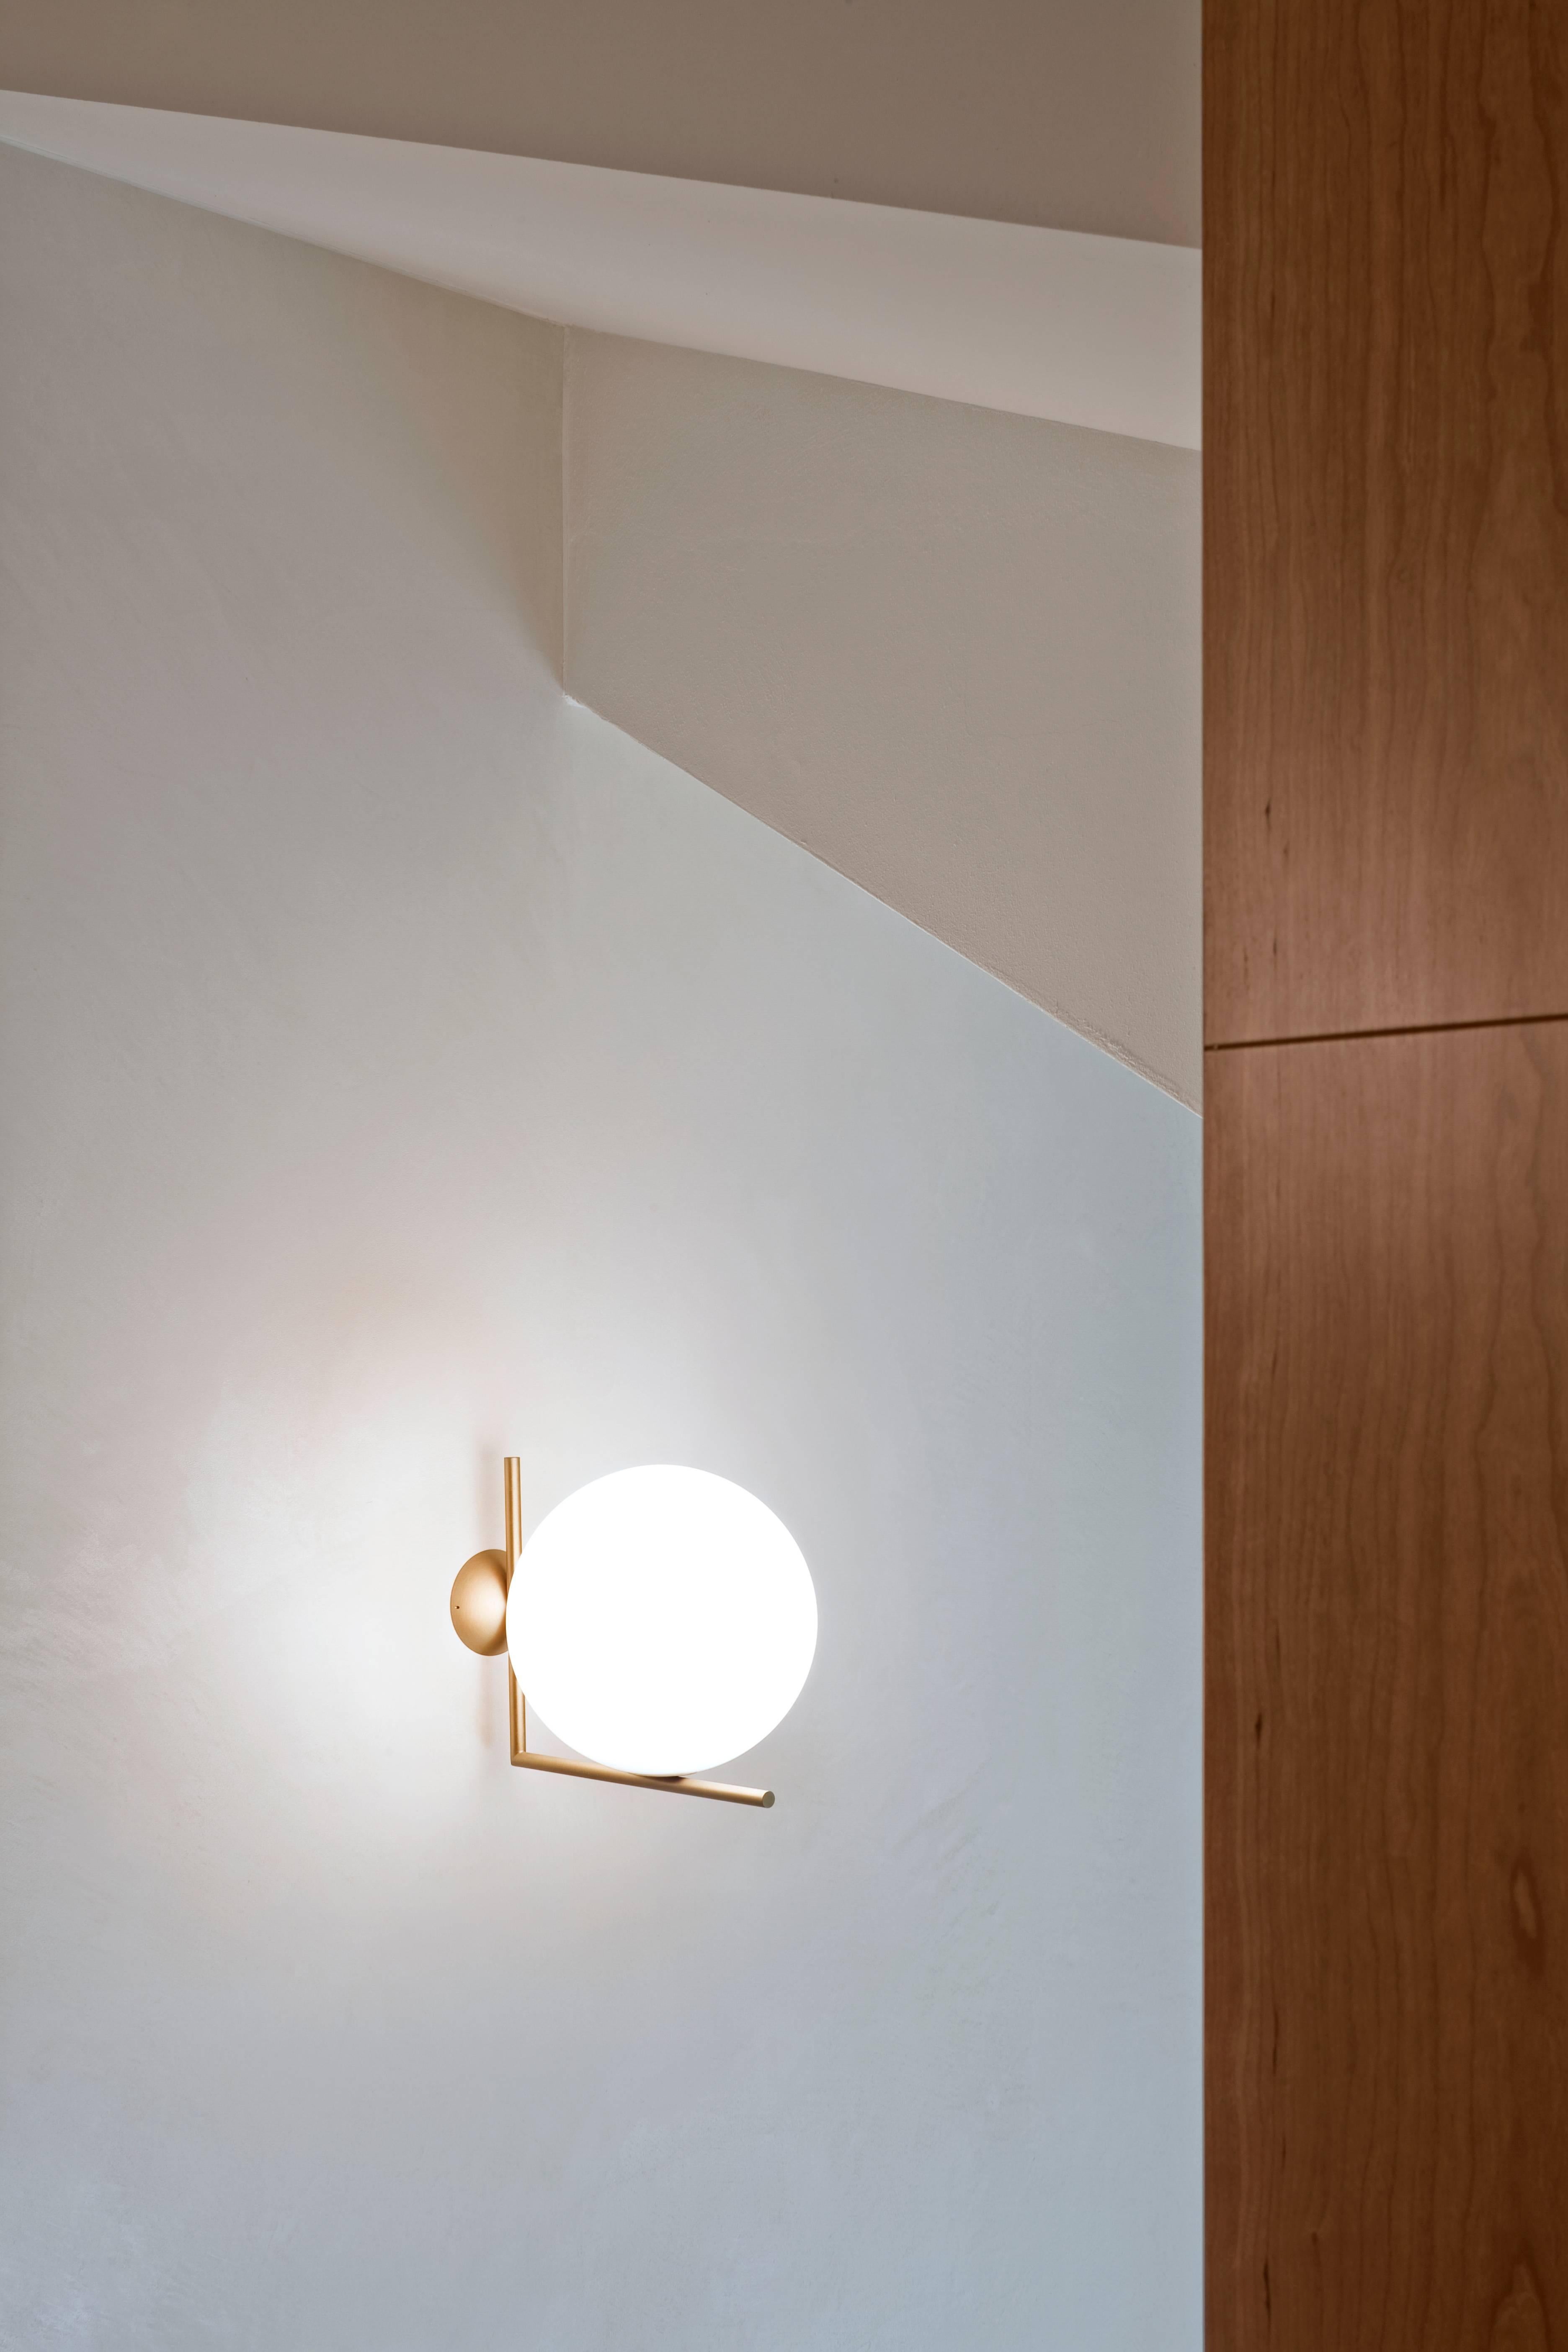 FLOS IC 2 Ceiling & Wall Light in Brass by Michael Anastassiades

Radiant light, delicate balance: Like the other pieces in his IC Light Series, the IC C/W lamp showcases designer Michael Anastassiades’ love of industrial simplicity as well as his